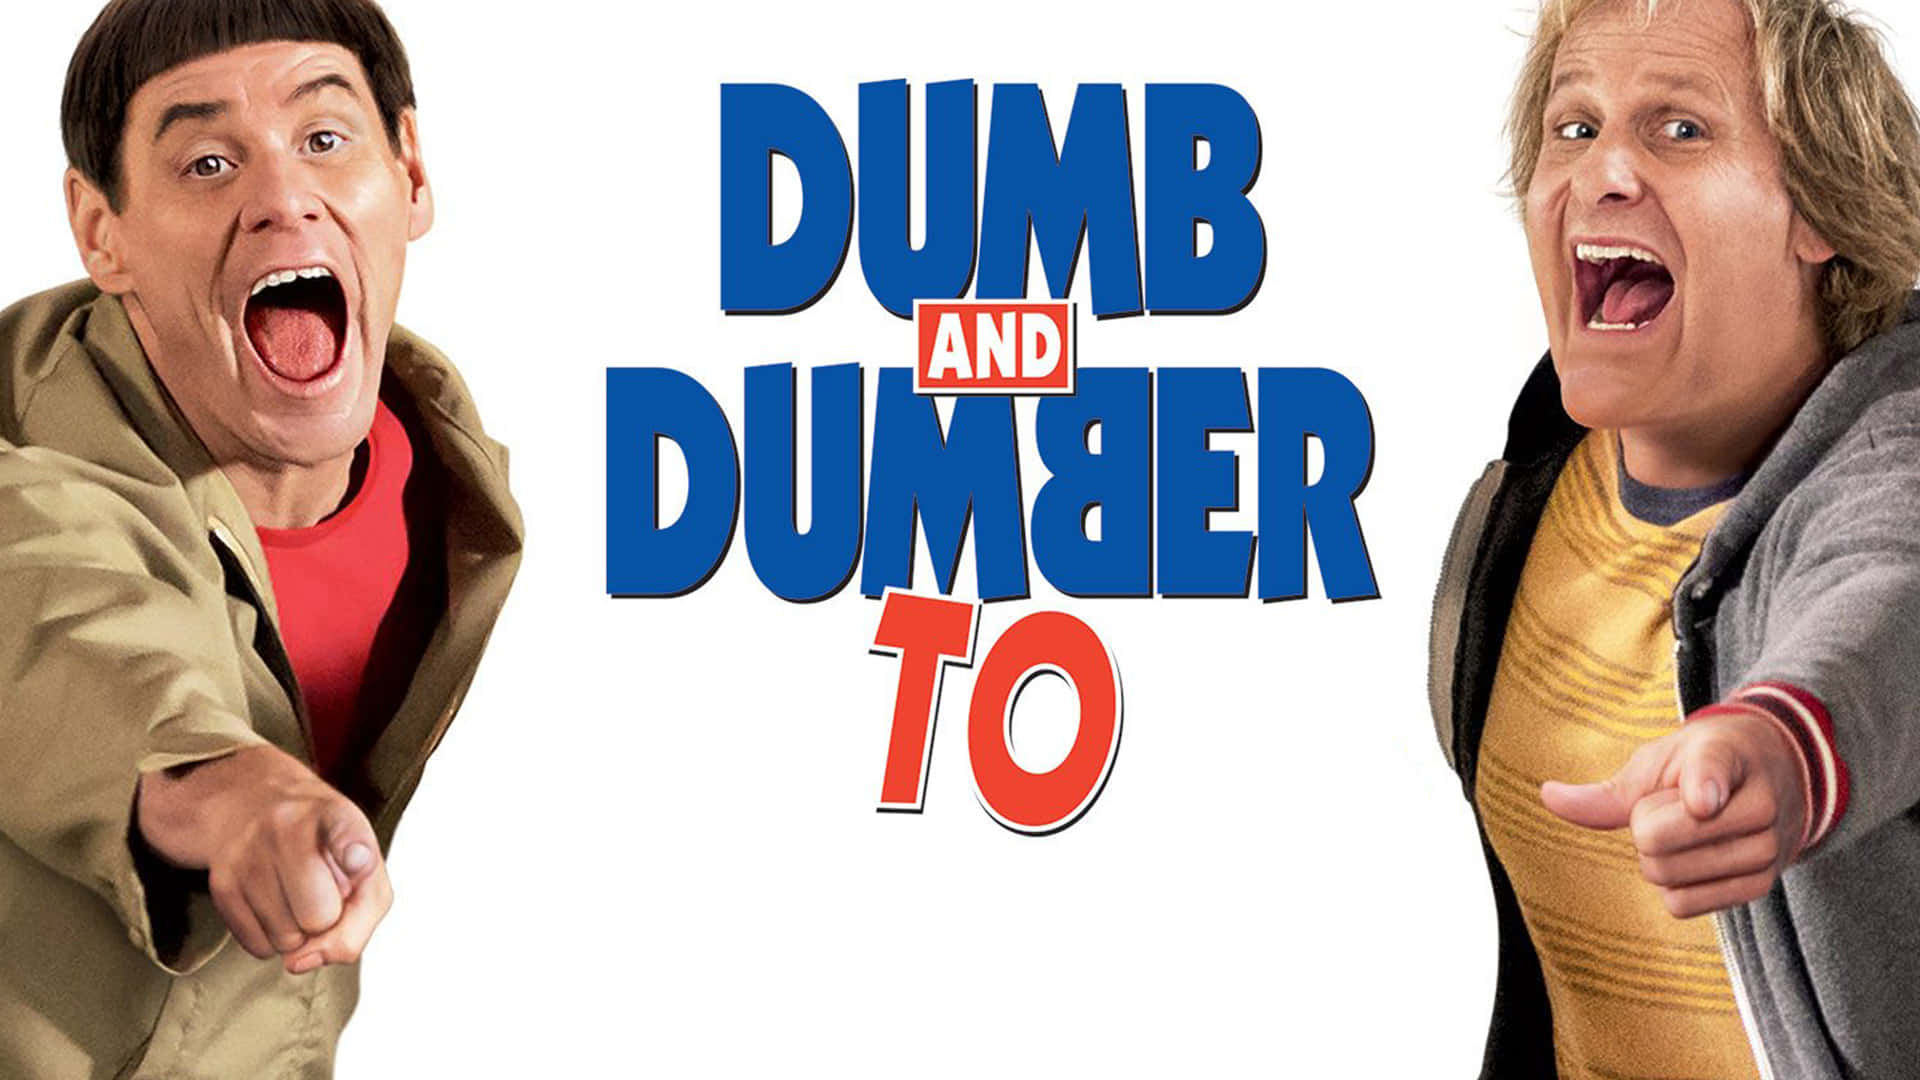 dumb and dumber scooter poster